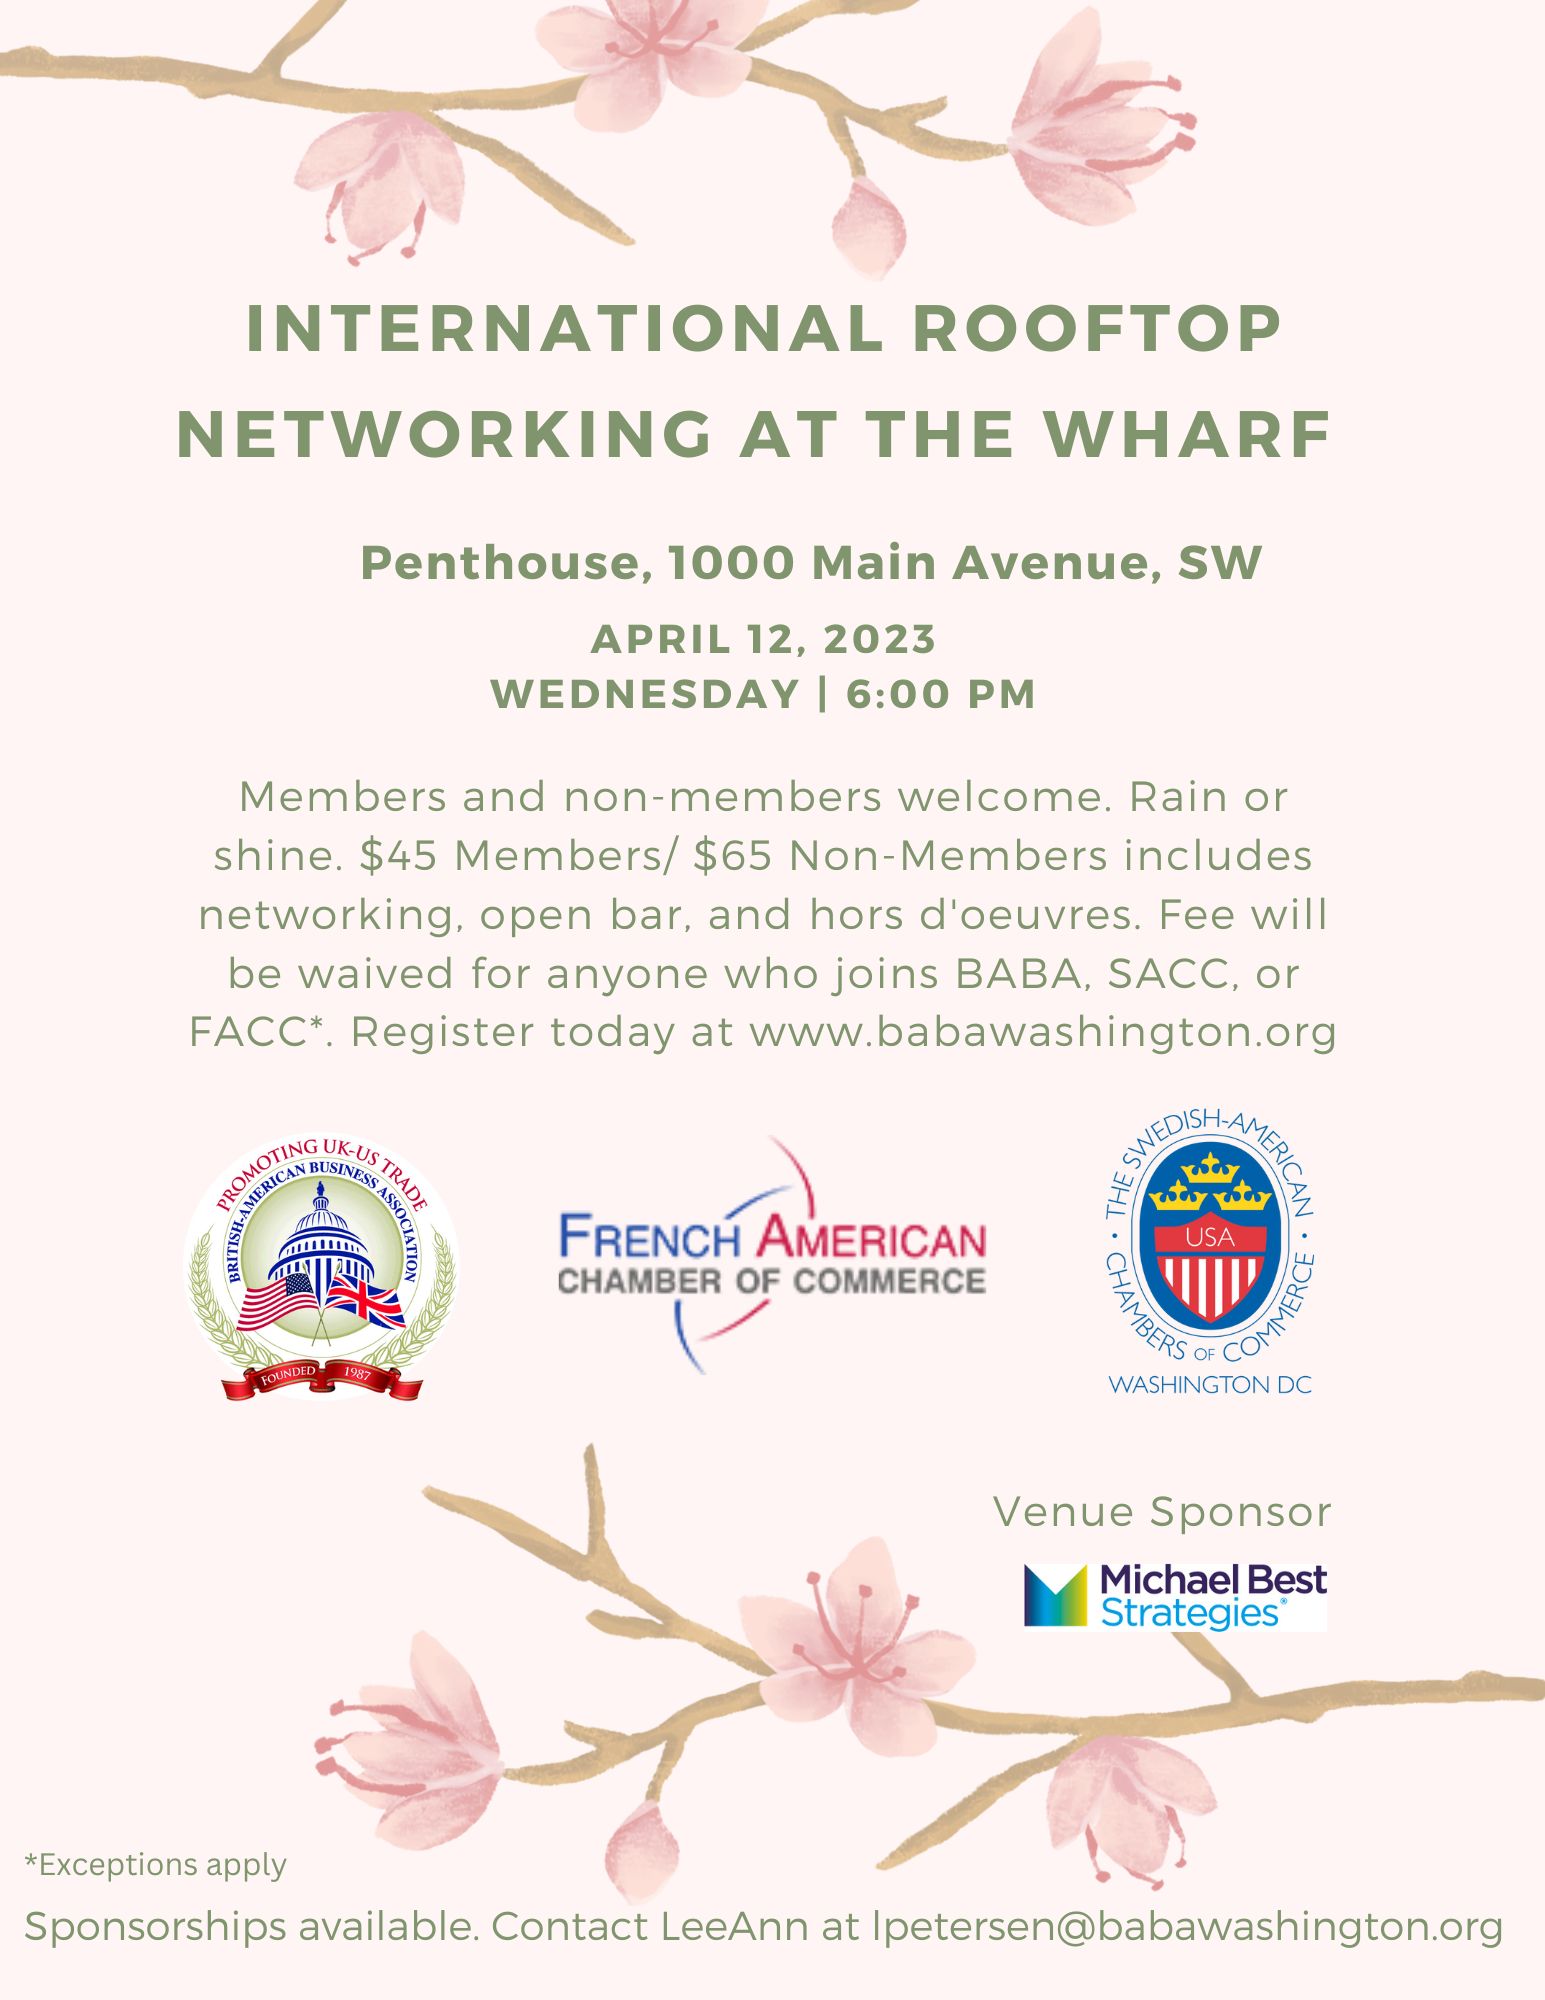 International Rooftop Networking at the Wharf